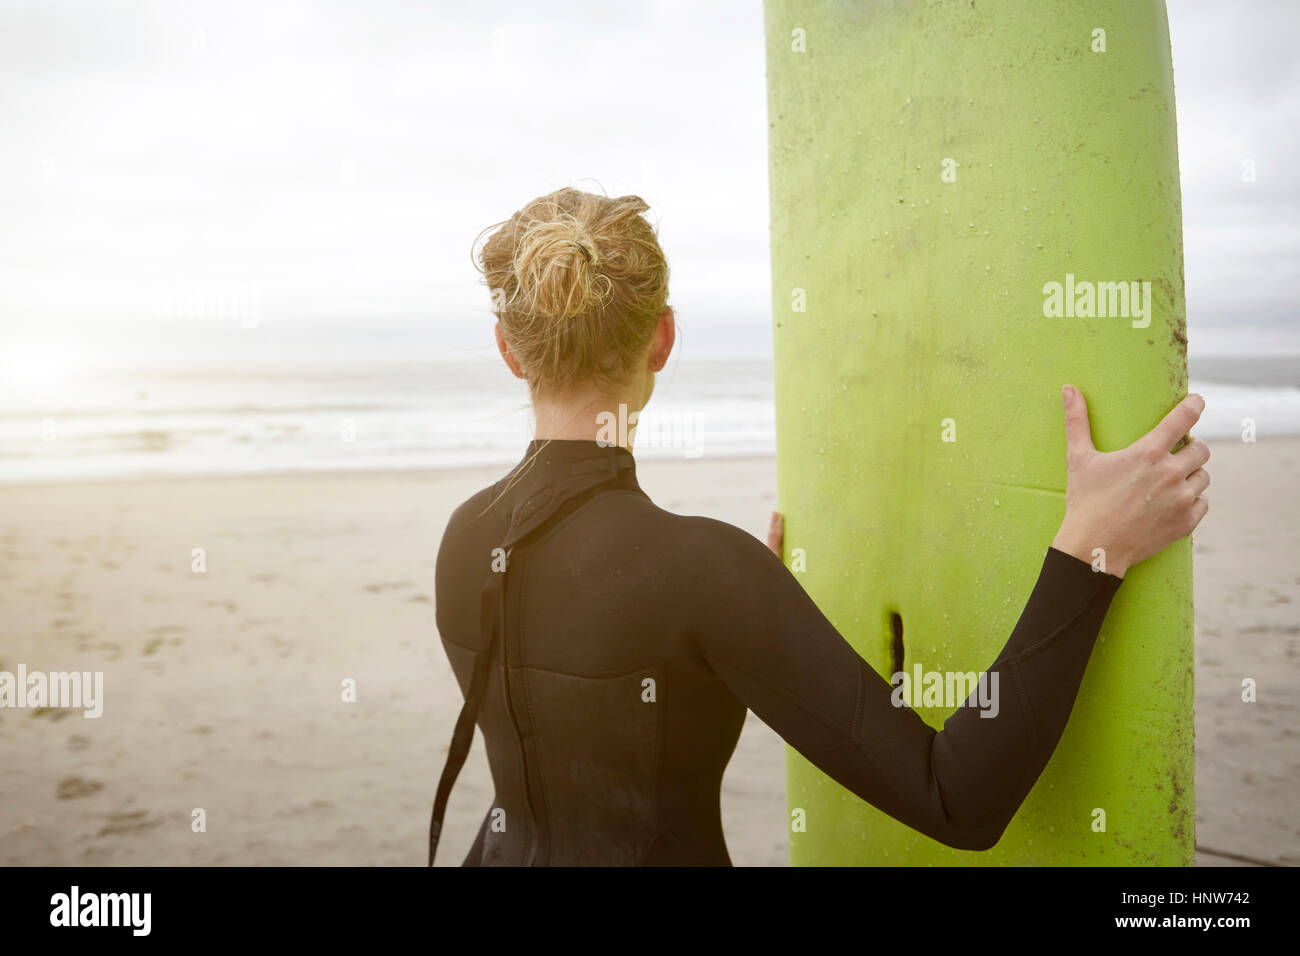 Female surfer holding surfboard looking out from Rockaway Beach, New York, USA Stock Photo